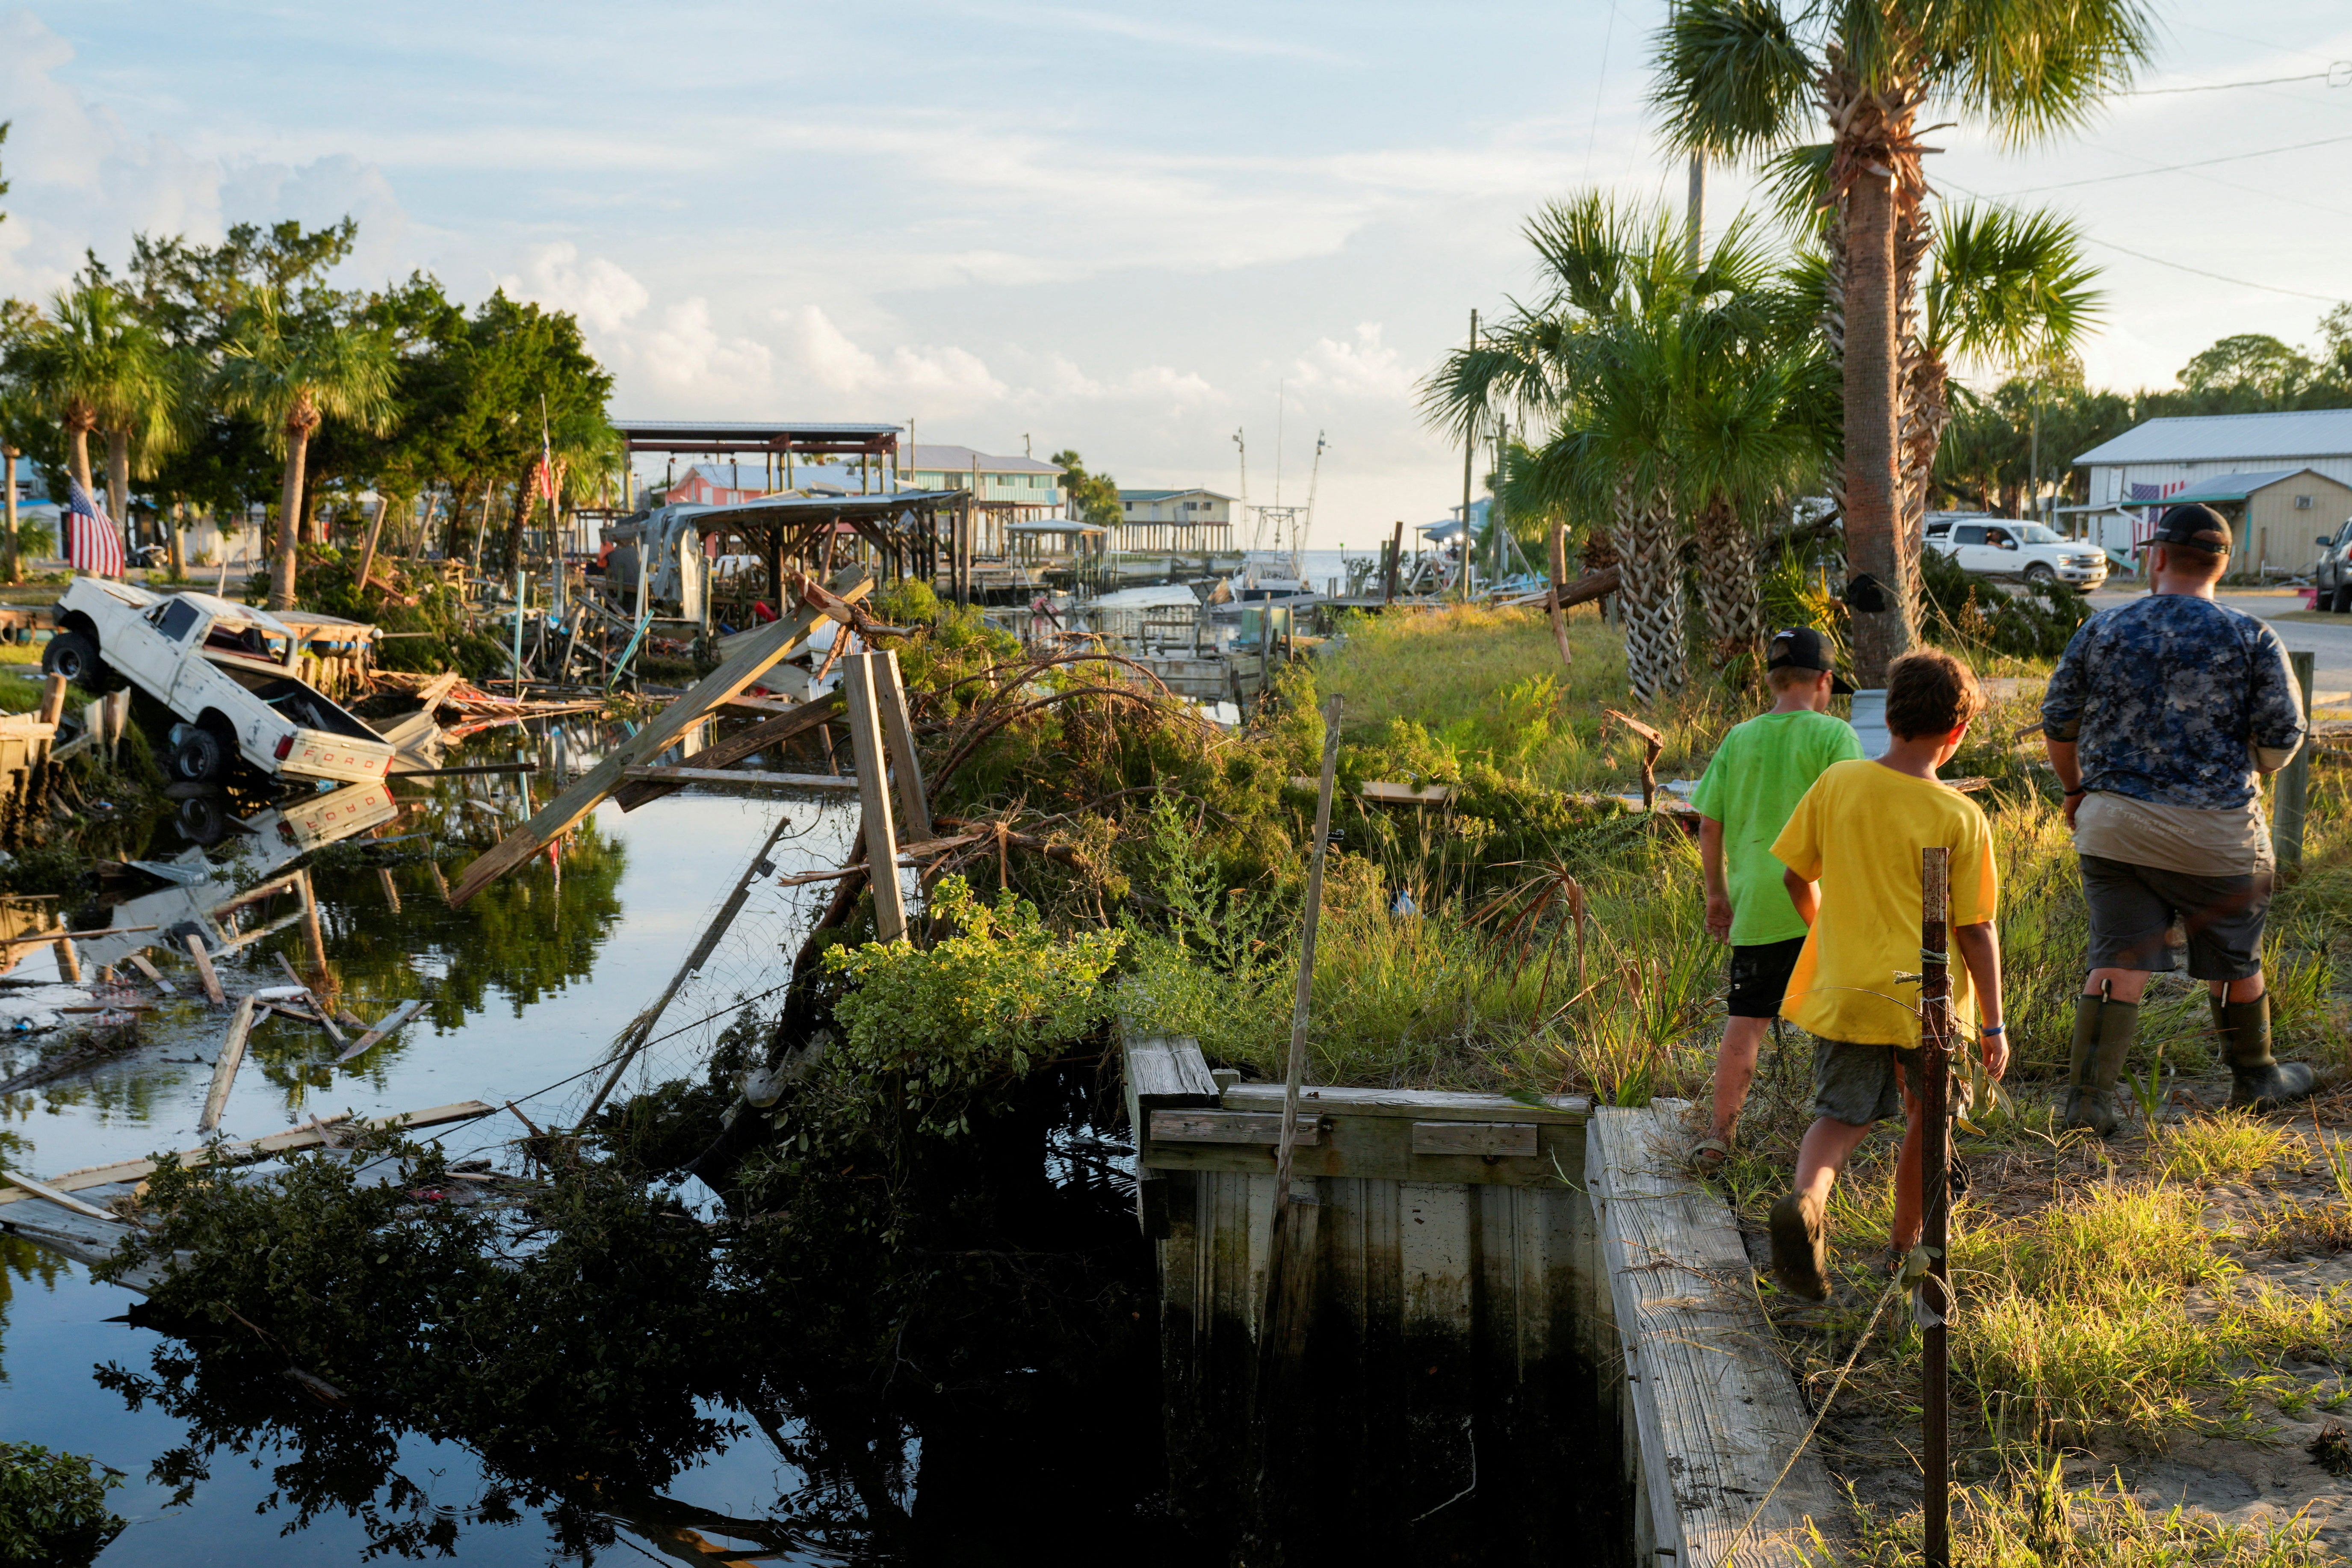 The Rollison brothers Landon, 17, Lawton, 12, and Lane, 11, walk past a canal littered with debris after the arrival of Hurricane Idalia in their hometown of Horseshoe Beach, Florida on August 31, 2023